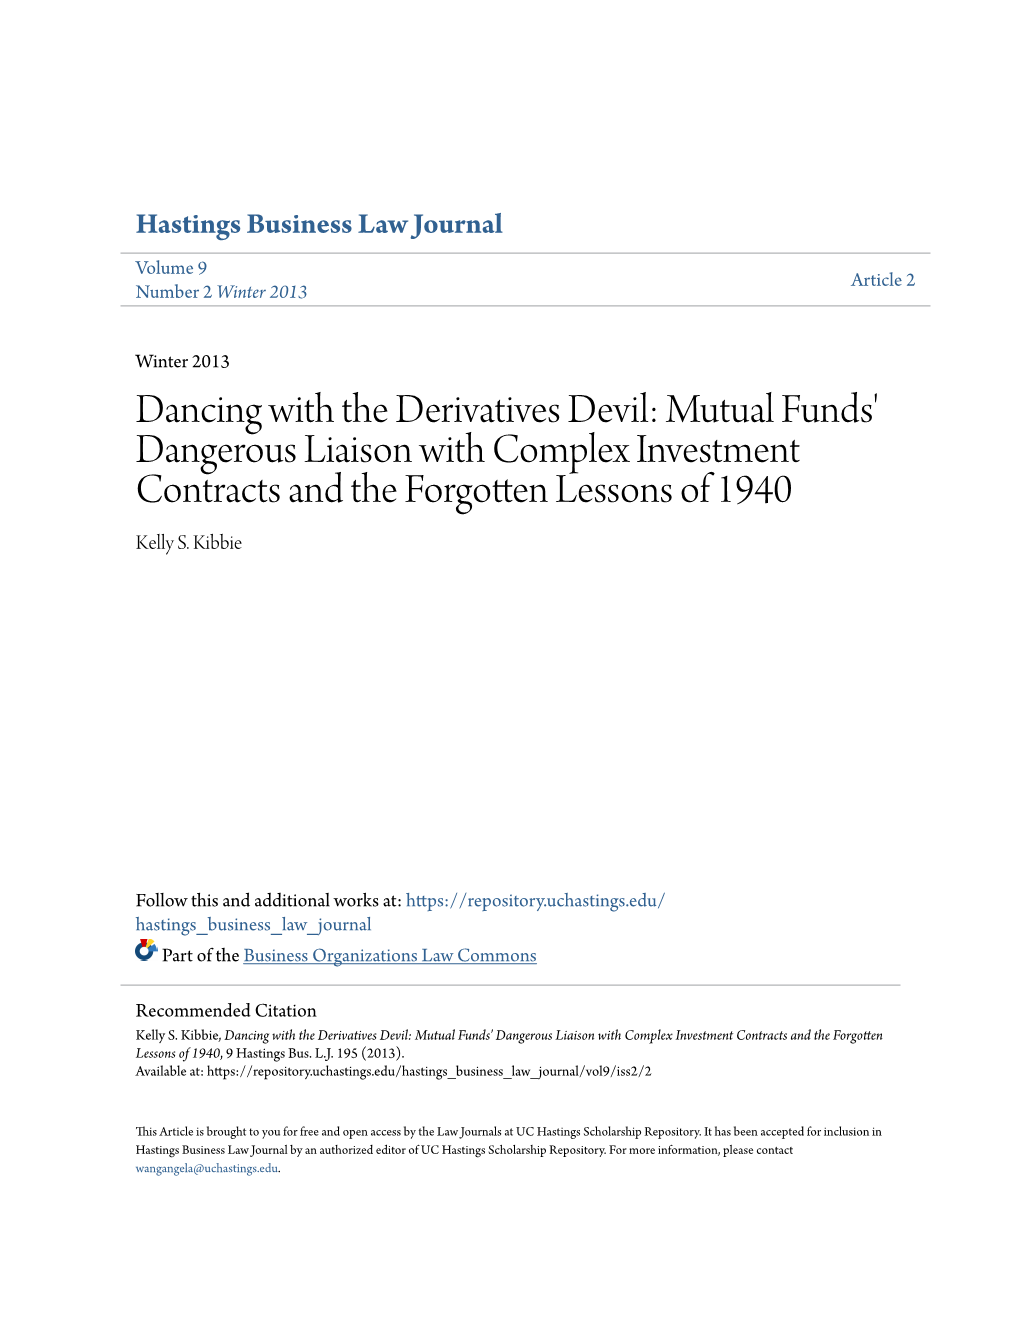 Dancing with the Derivatives Devil: Mutual Funds' Dangerous Liaison with Complex Investment Contracts and the Forgotten Lessons of 1940 Kelly S